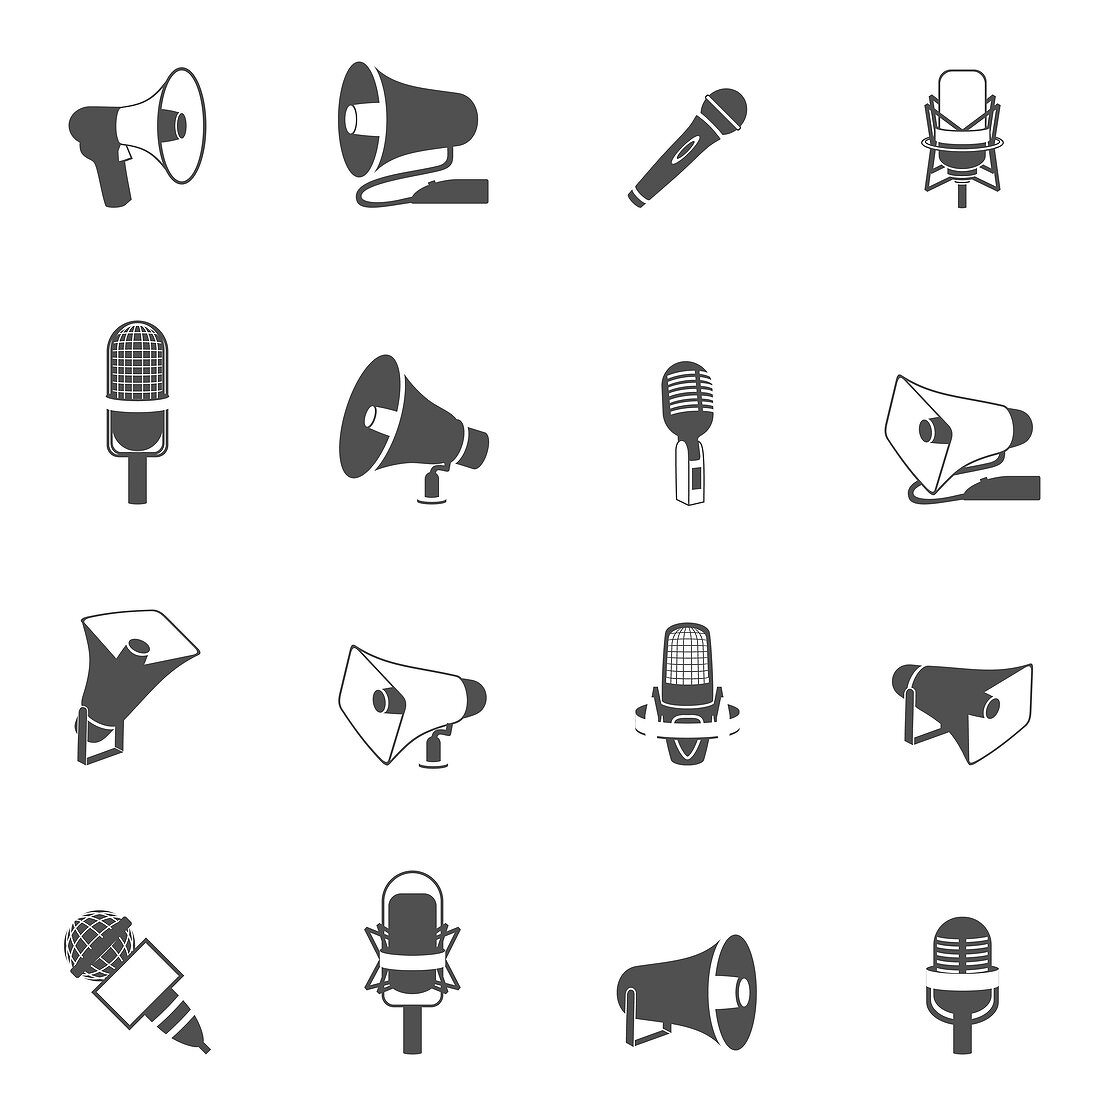 Microphone and megaphone icons, illustration